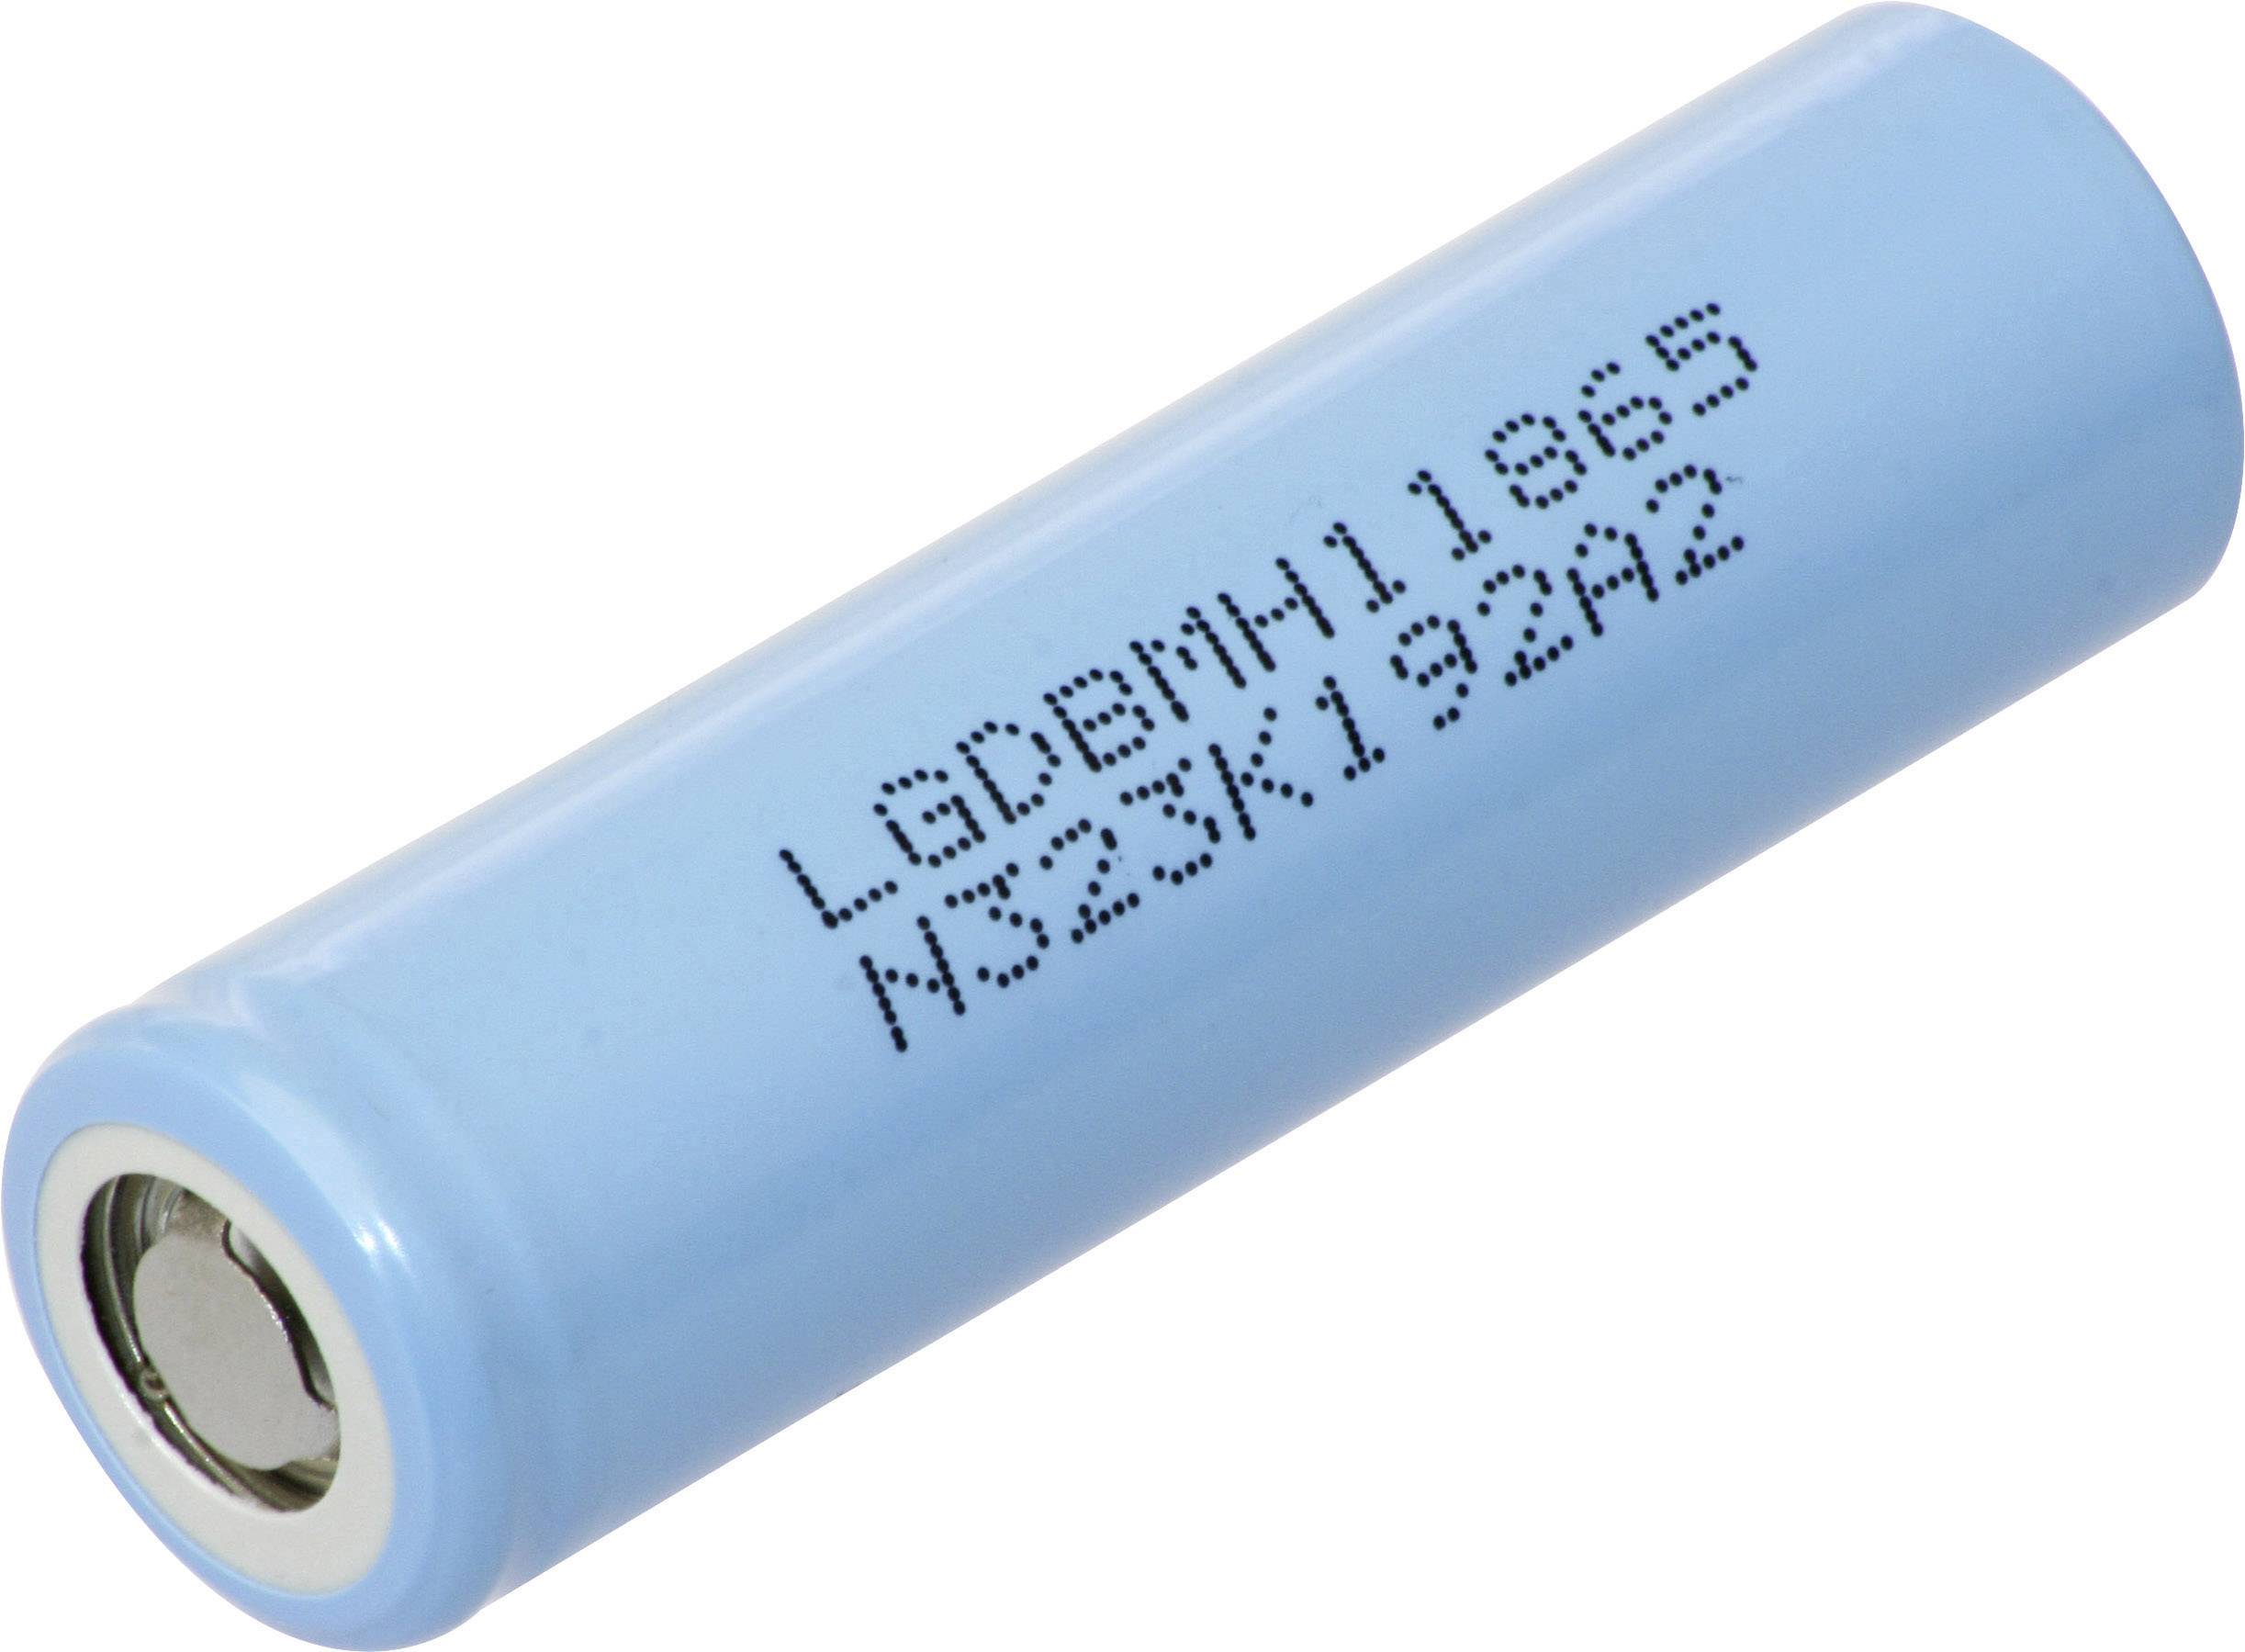 Buy LG Chem INR18650MH1 Non-standard battery (rechargeable) 18650 High  current loading Li-ion 3.7 V 3000 mAh